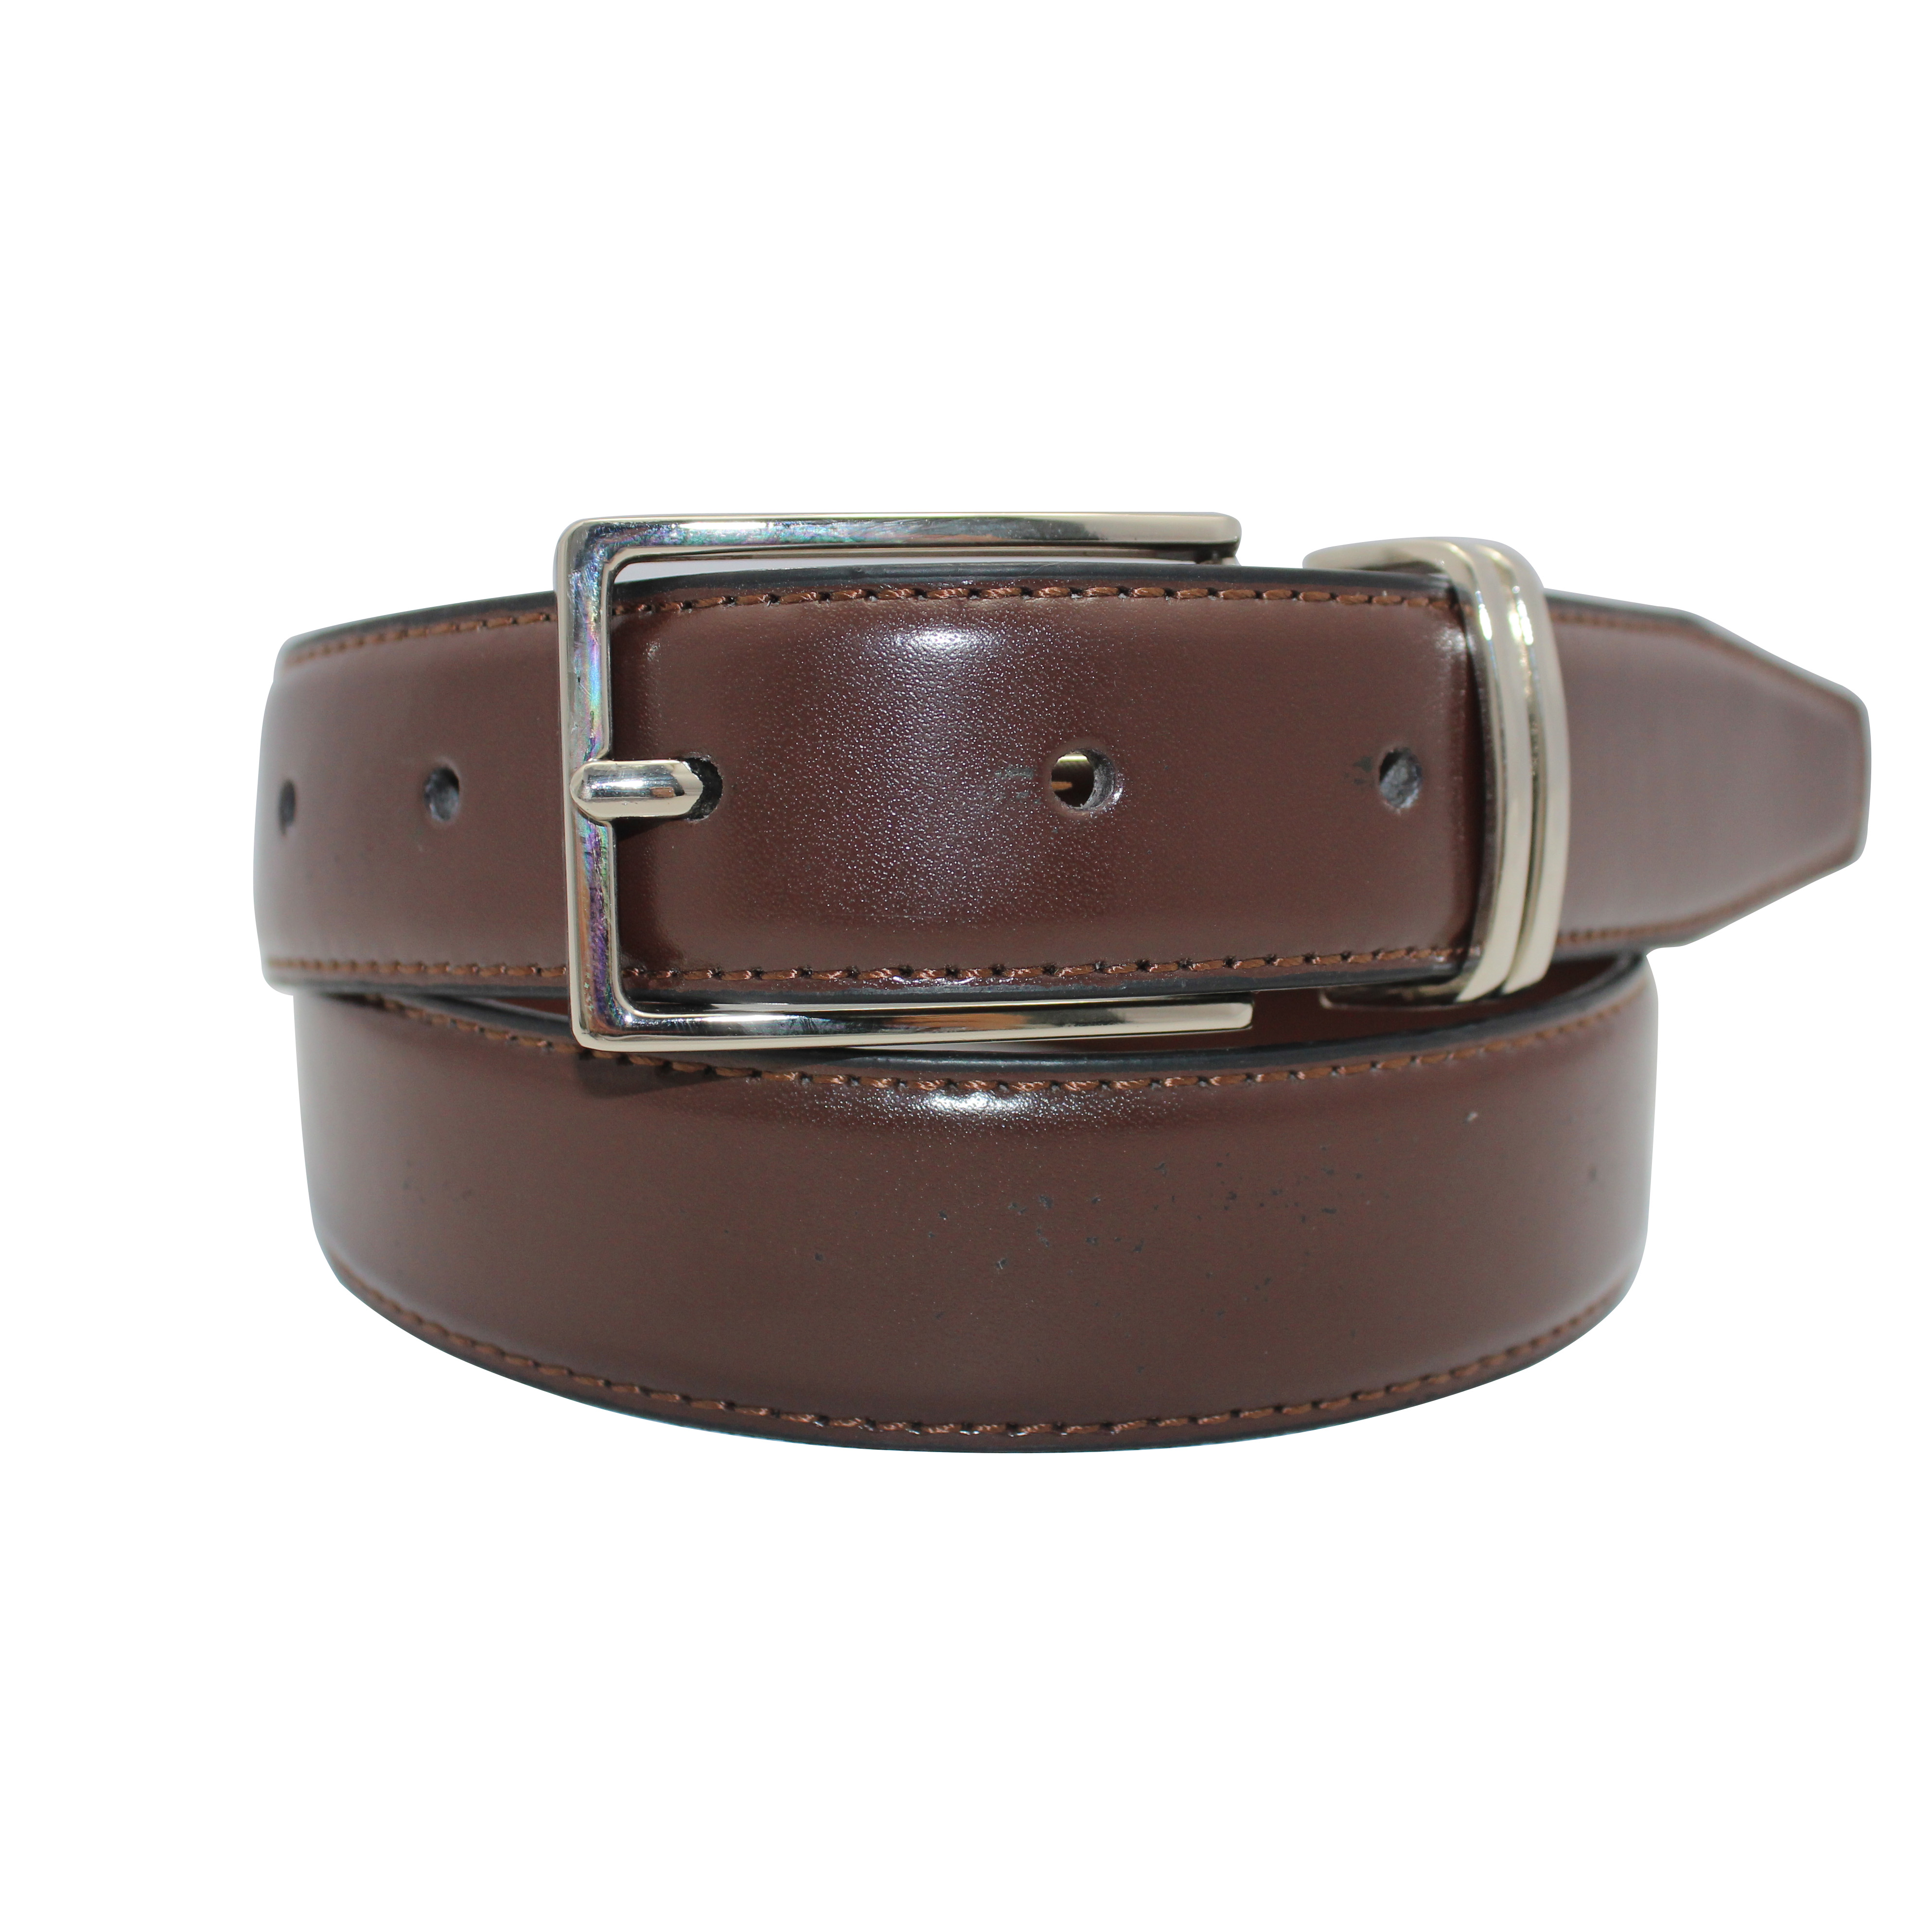 Sophisticated and Chic Women's Patent Leather Belt 30-23053